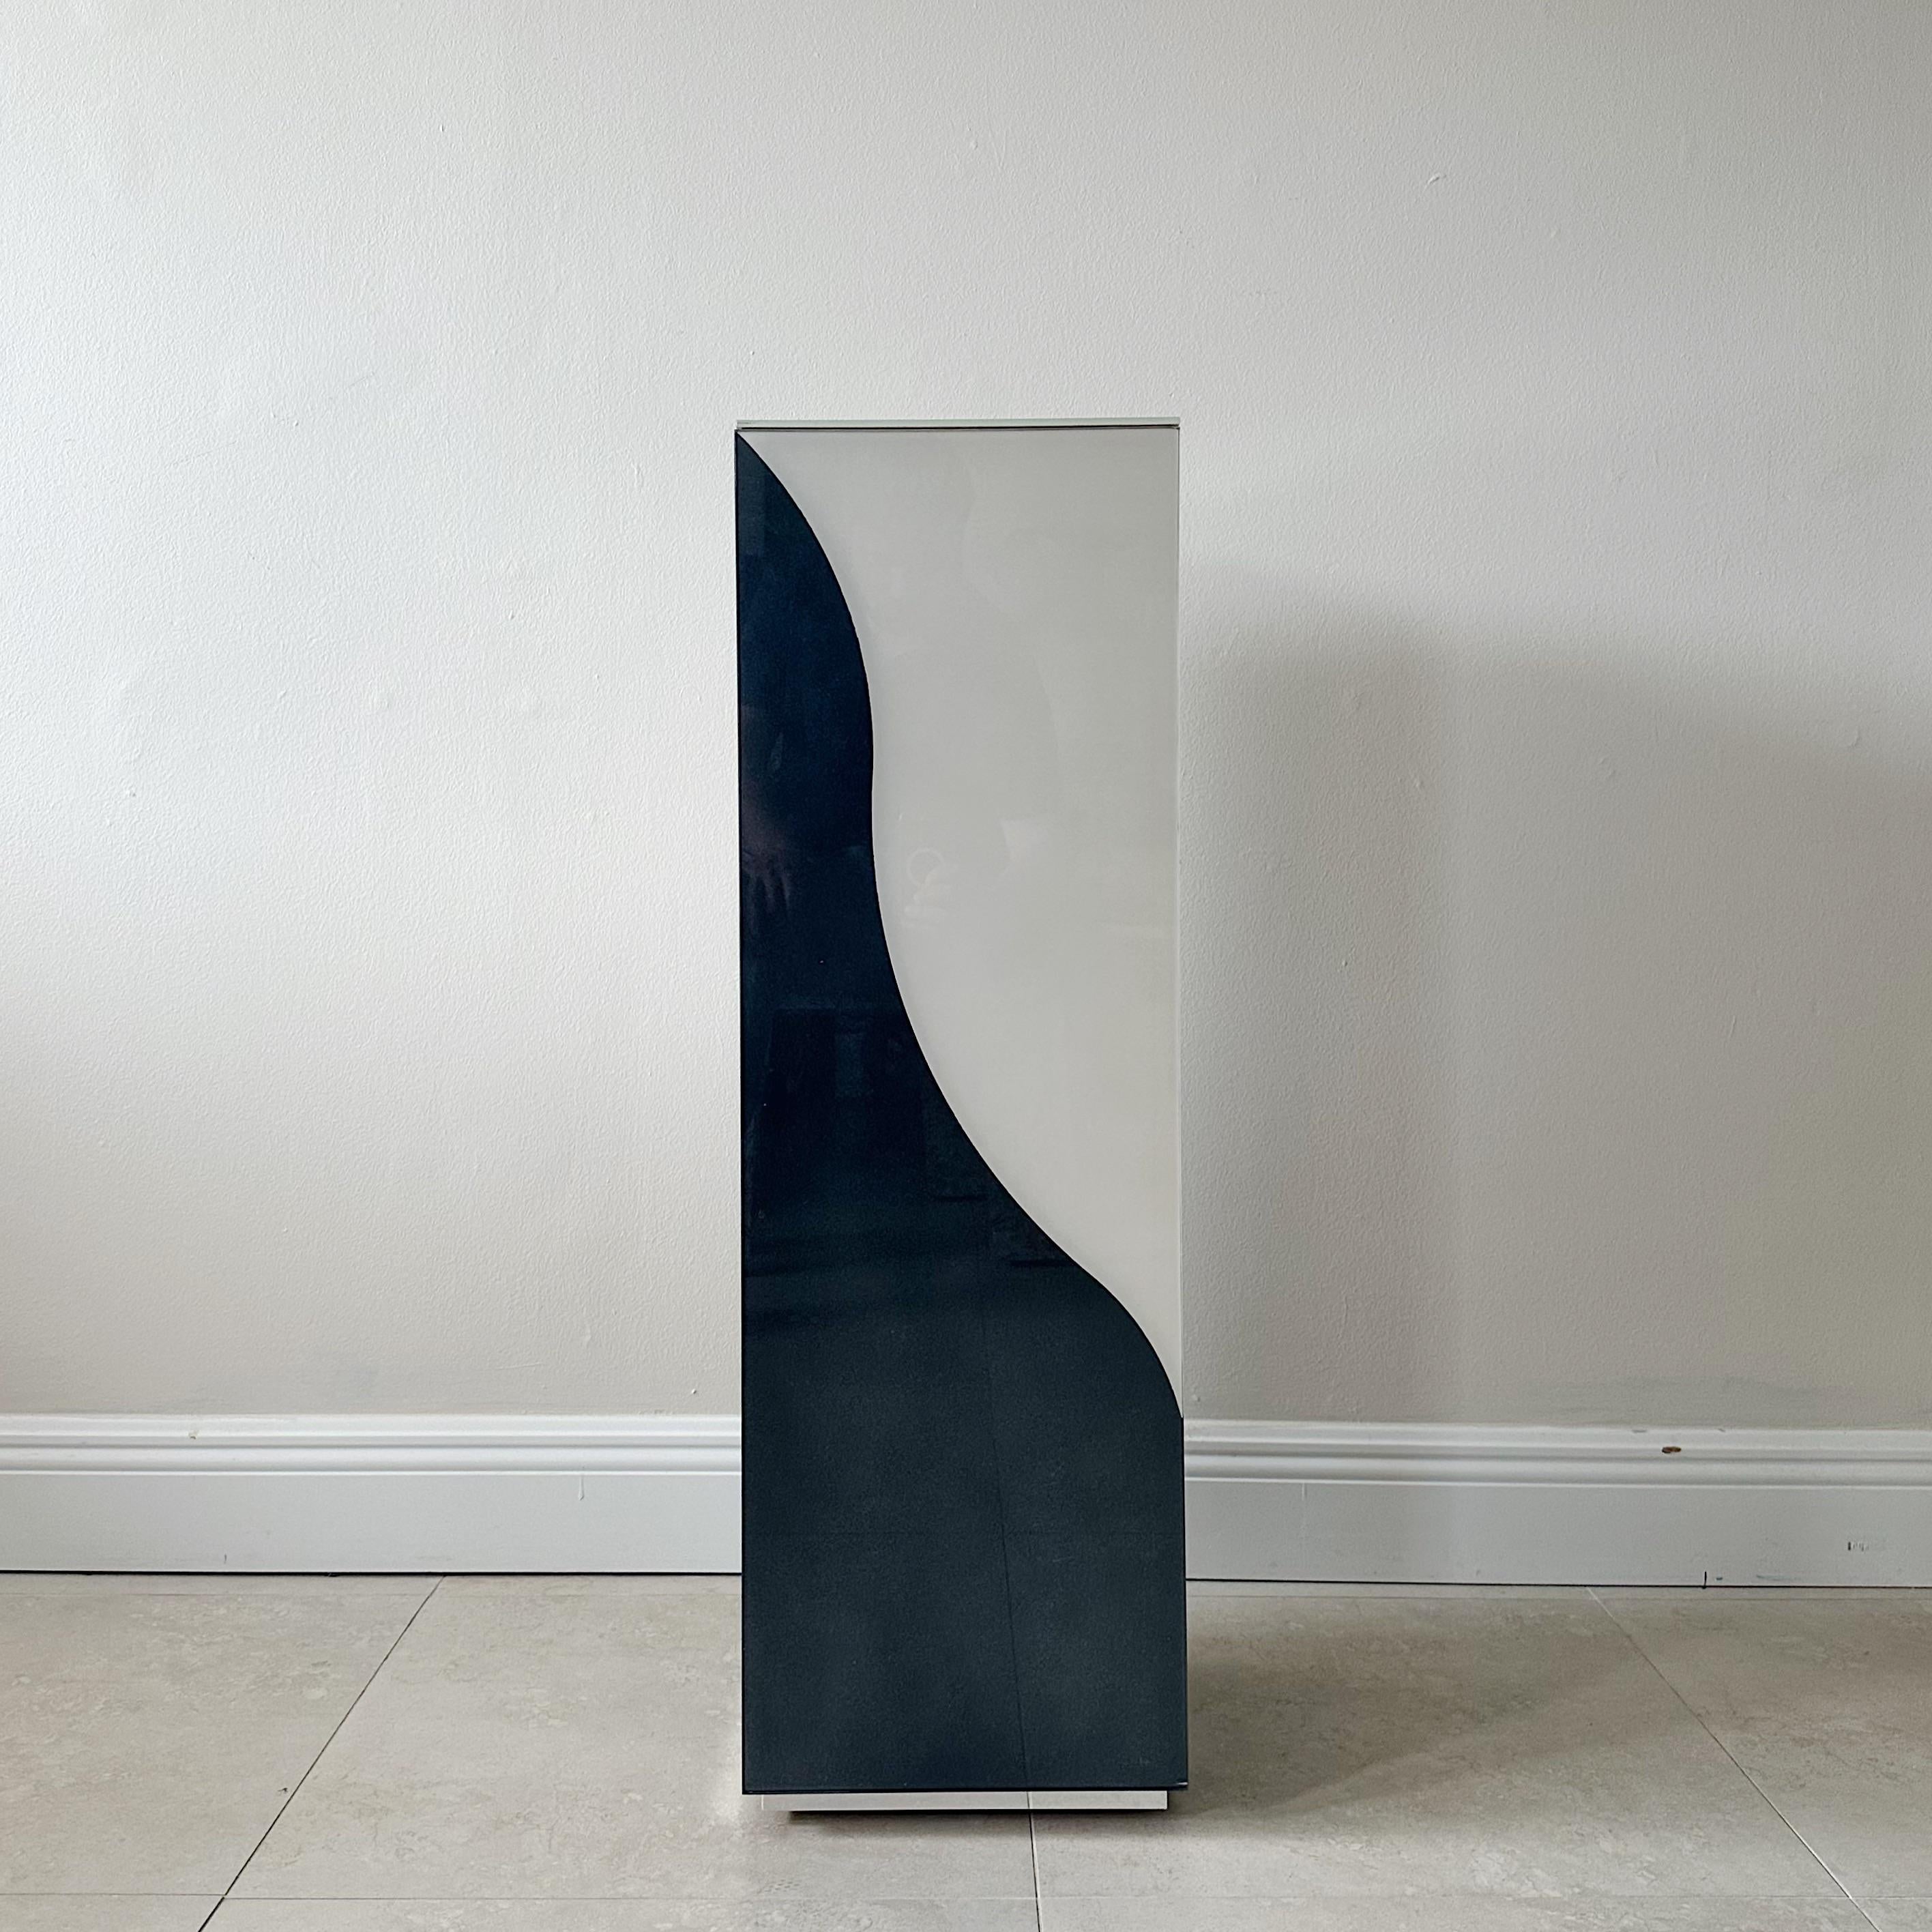 A tall rectangular pedestal from the 1970s, with wavy black and white bonded colored glass. This exceptional piece of furniture is attributed to either F. Hayman Chaffey for Directional, both known for their iconic mid-century designs. The wavy